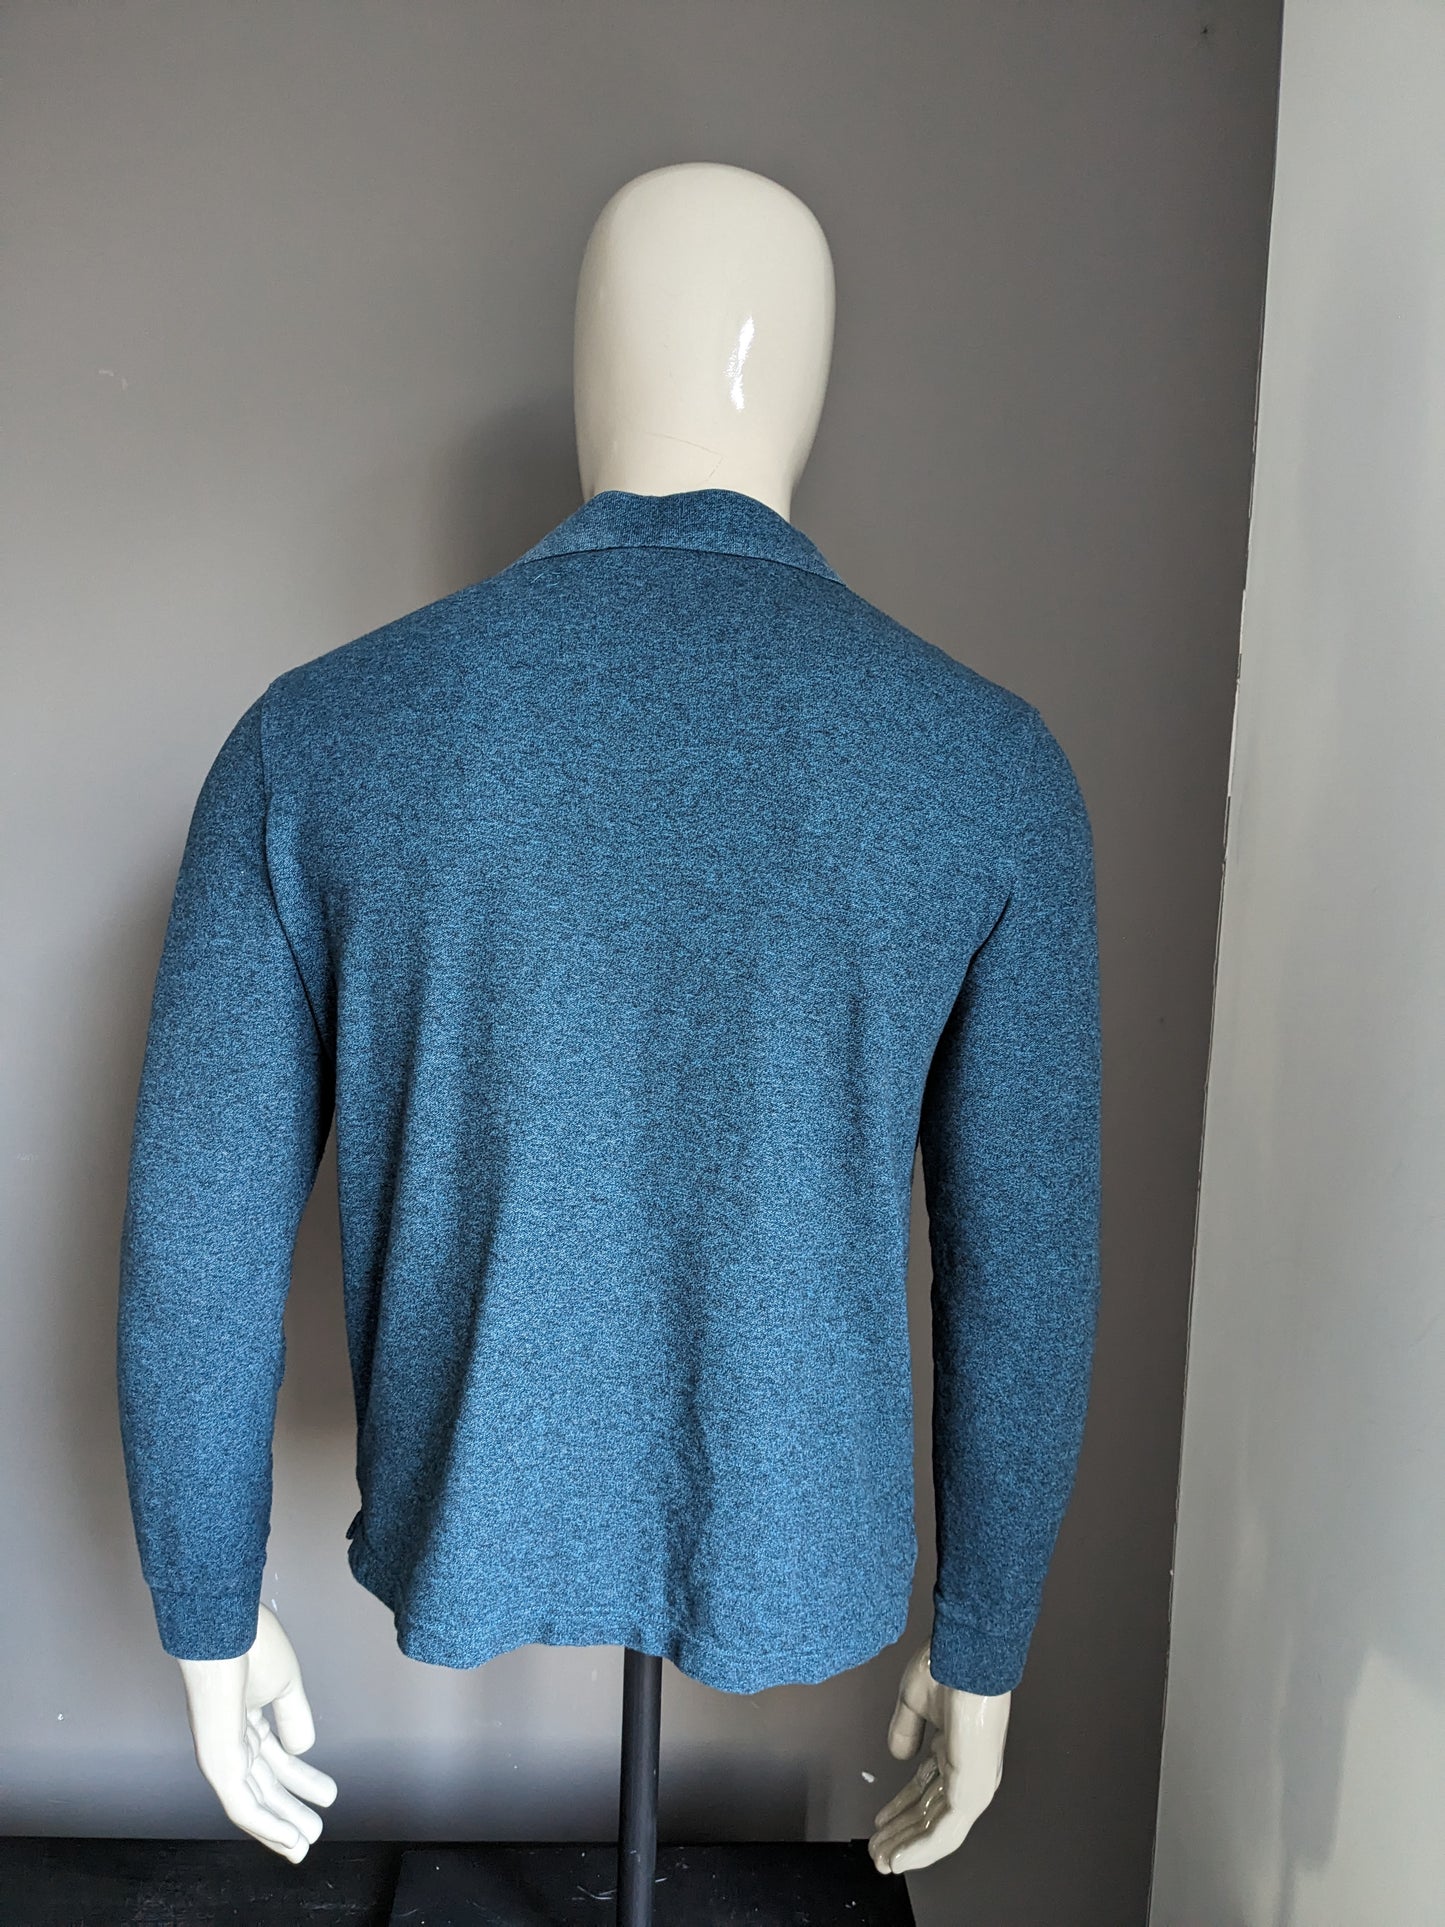 M&S Collection Polotrui. Green blue mixed. Size M.